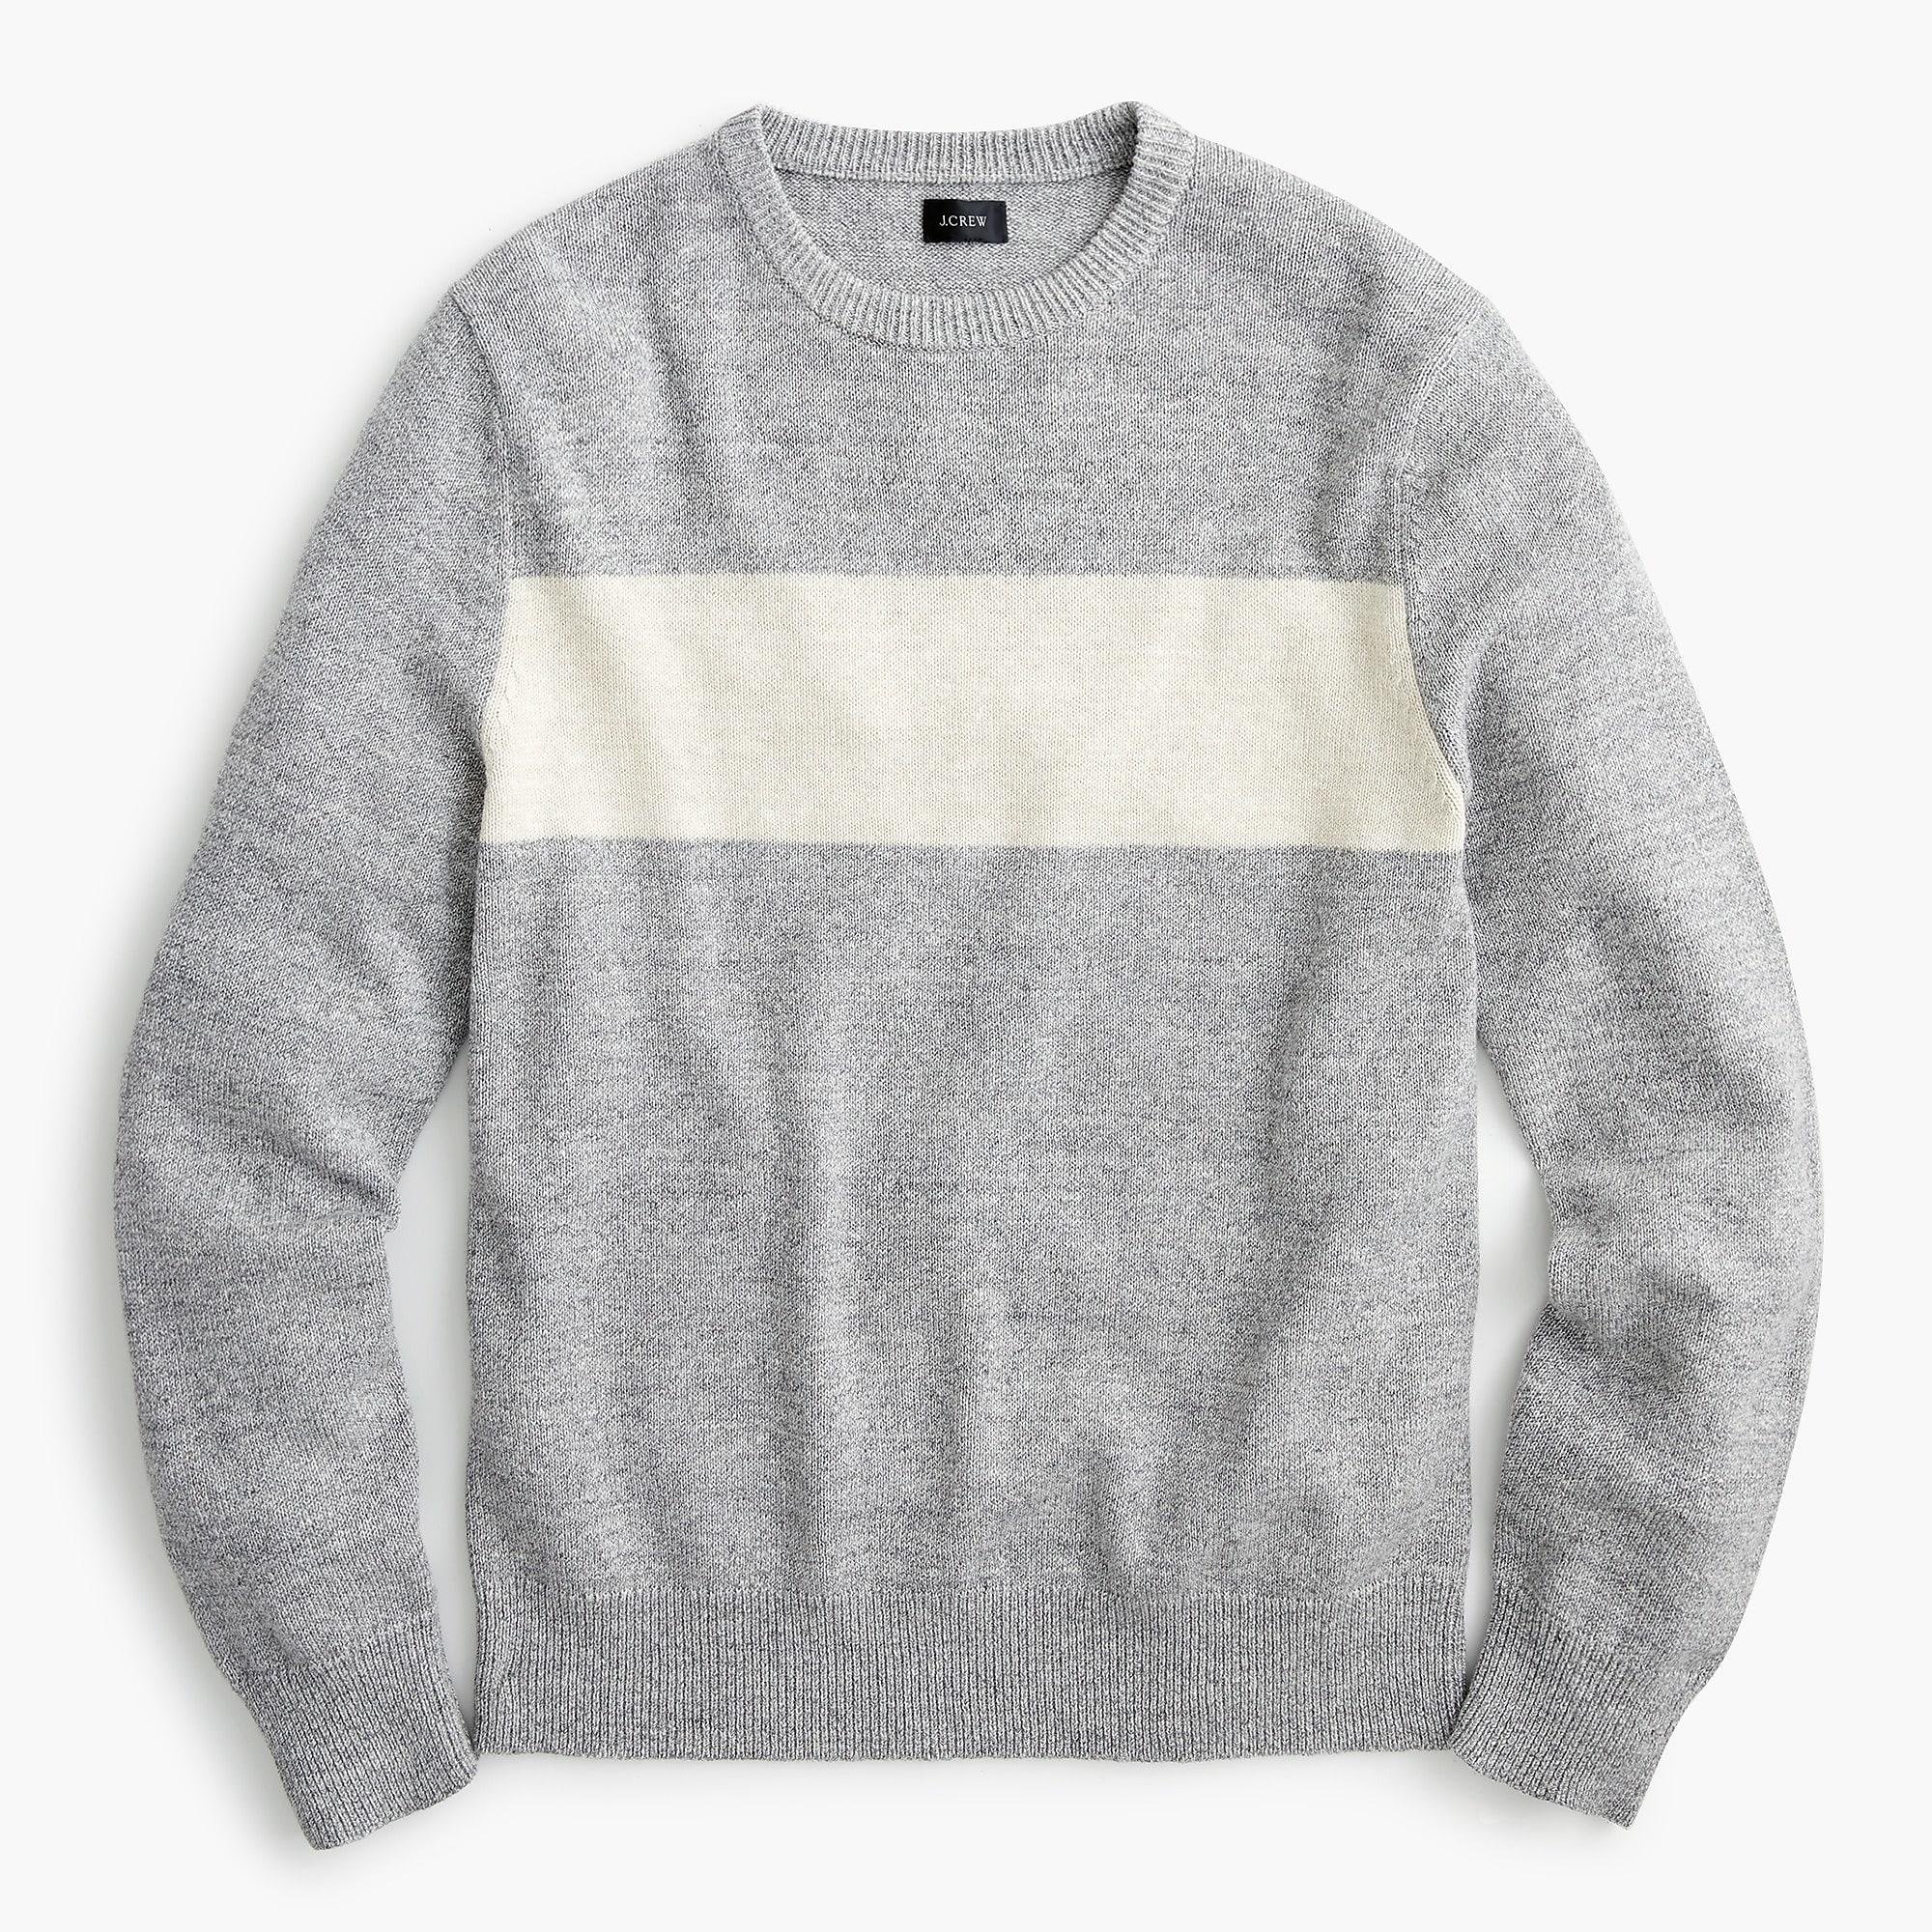 J.Crew Cotton-wool Chest Stripe Crewneck Sweater in Gray for Men - Lyst